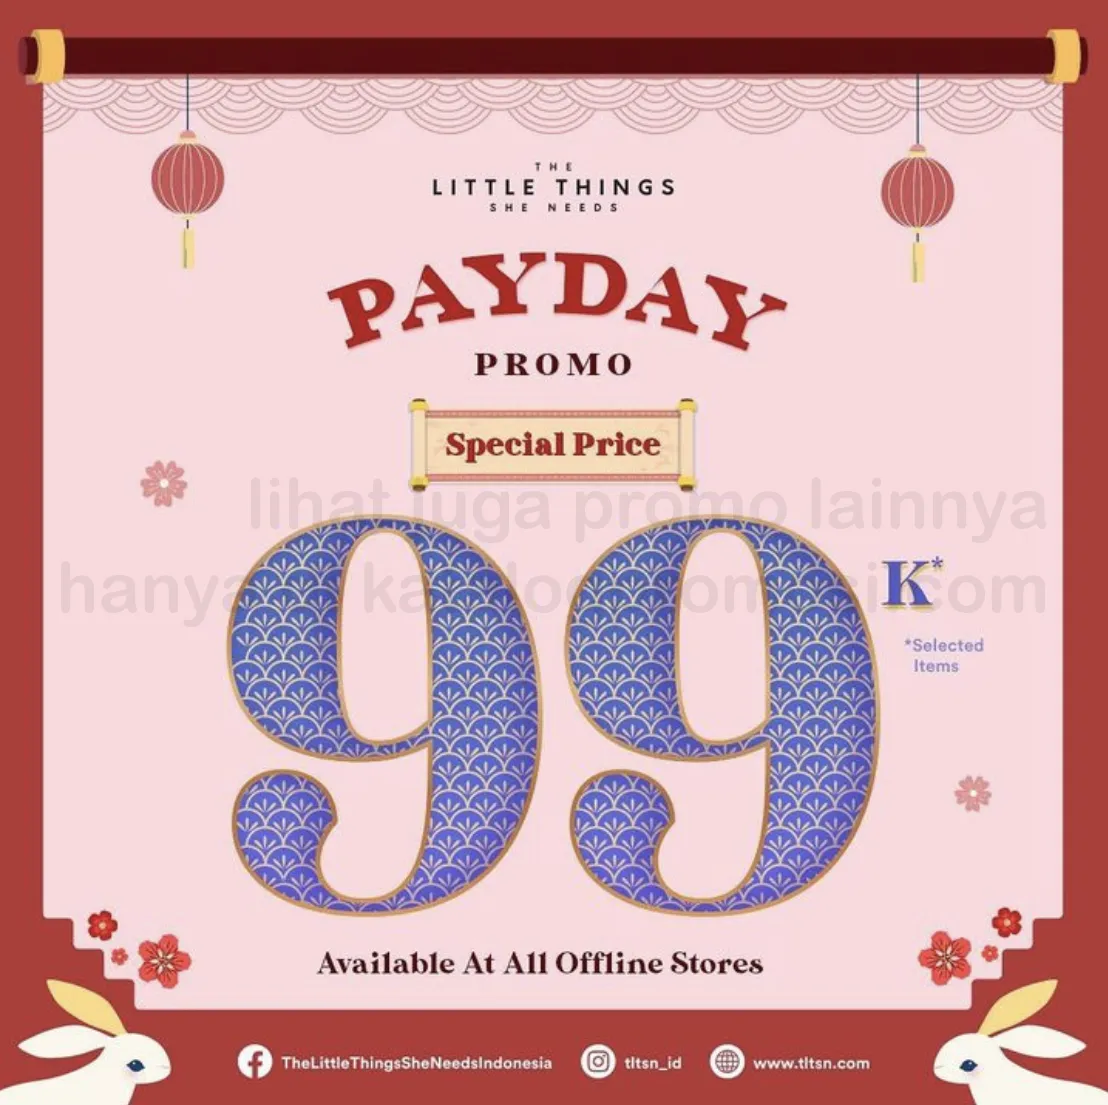 Promo The Little Things She Needs Payday Sale - Happy Price Rp 99.000 For Selected Item*